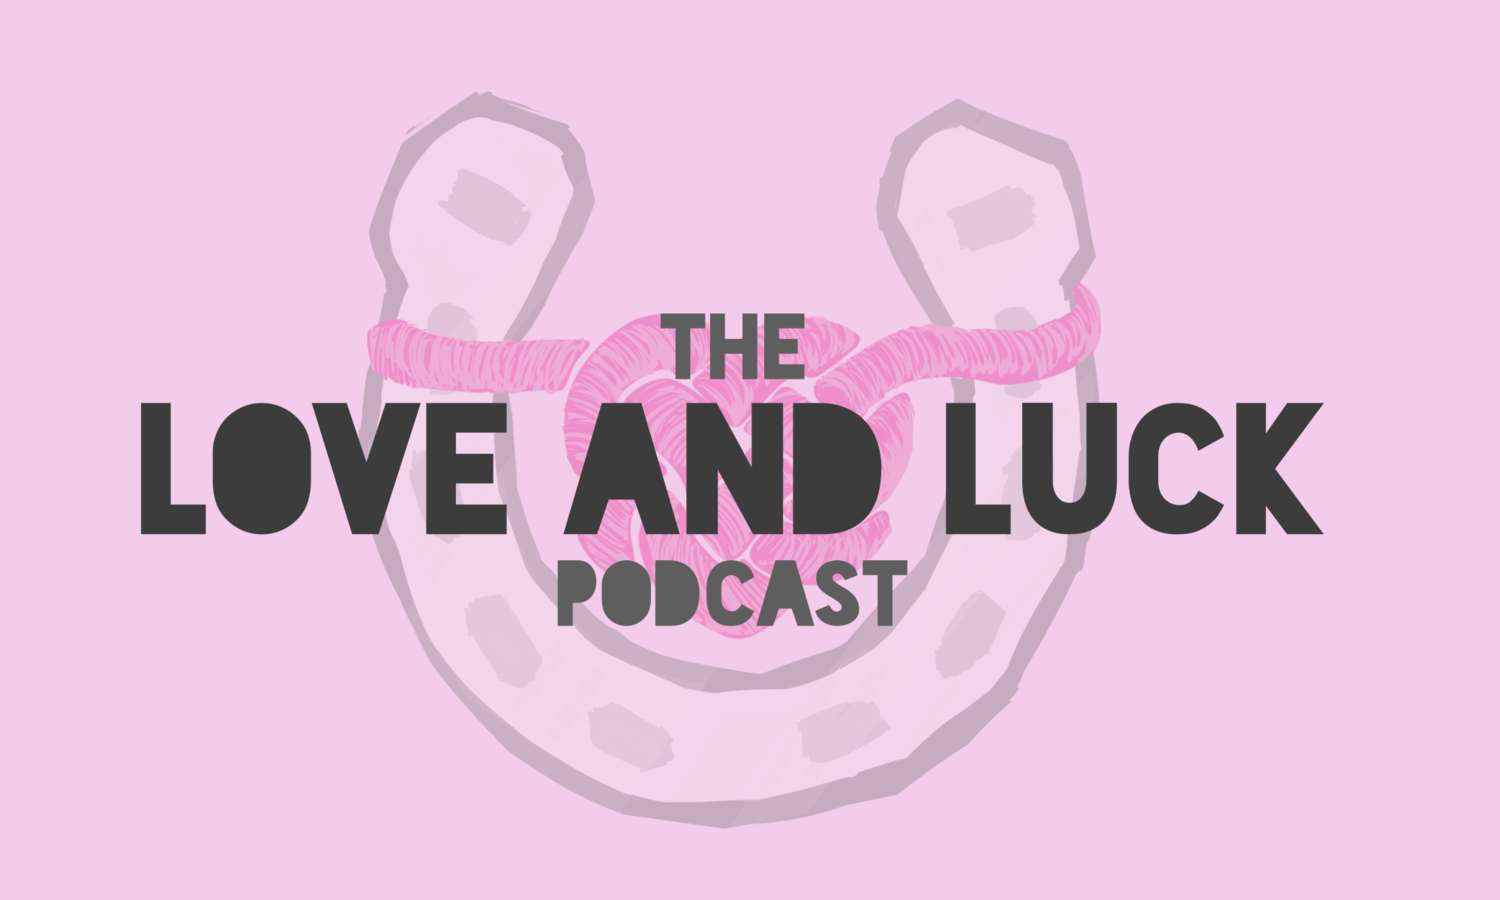 The Love and Luck Podcast